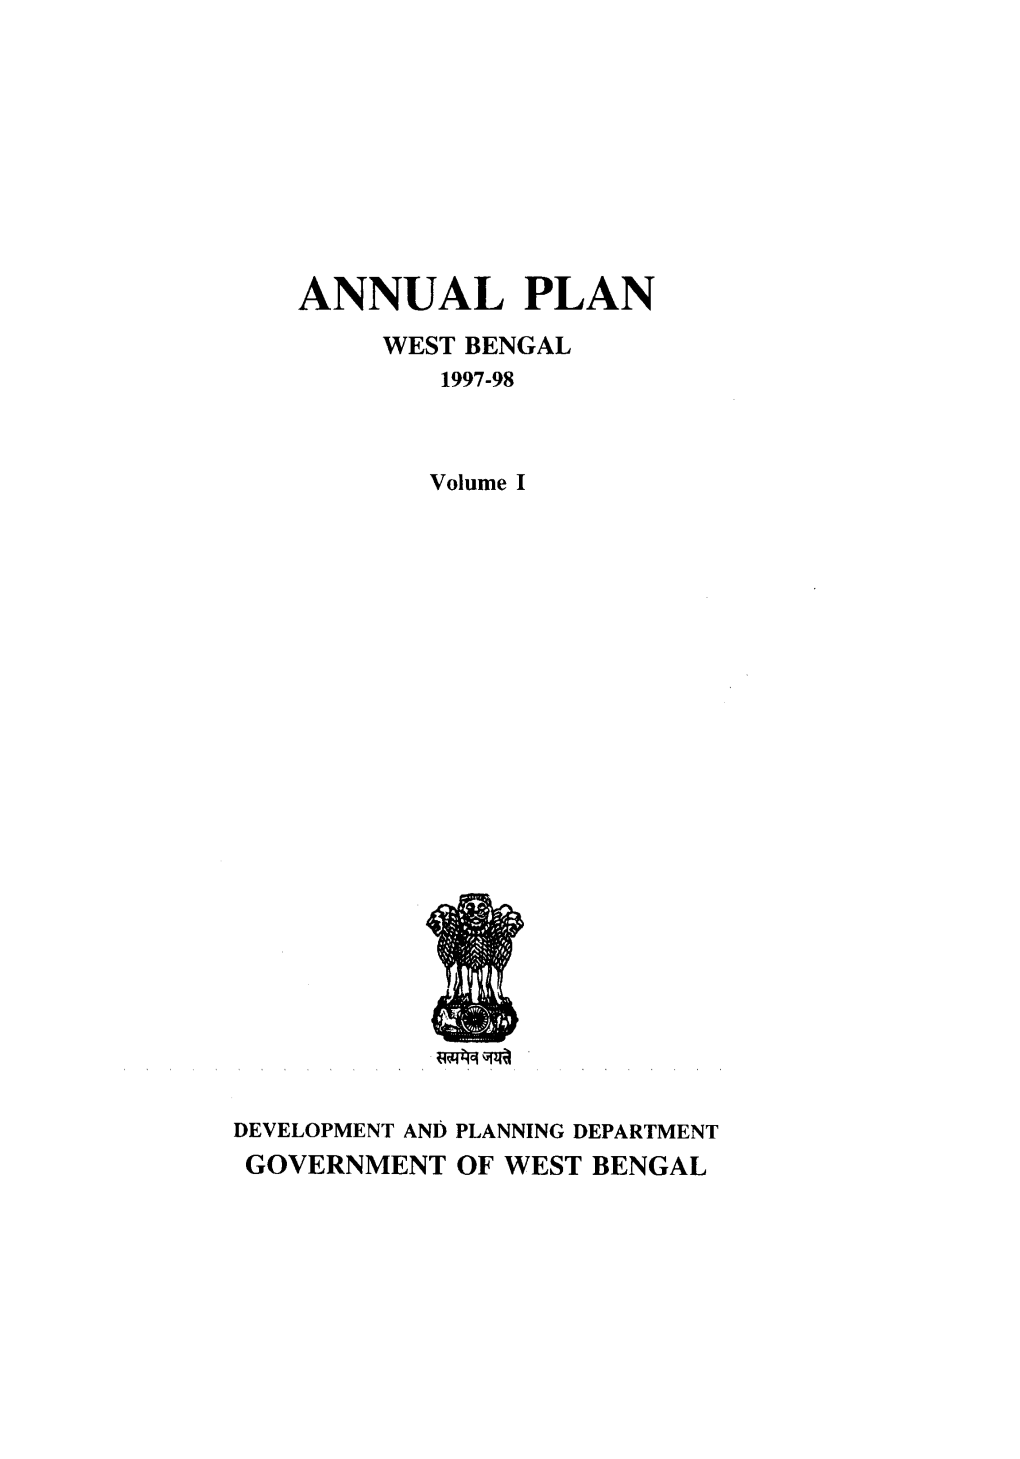 Annual Plan West Bengal 1997-98